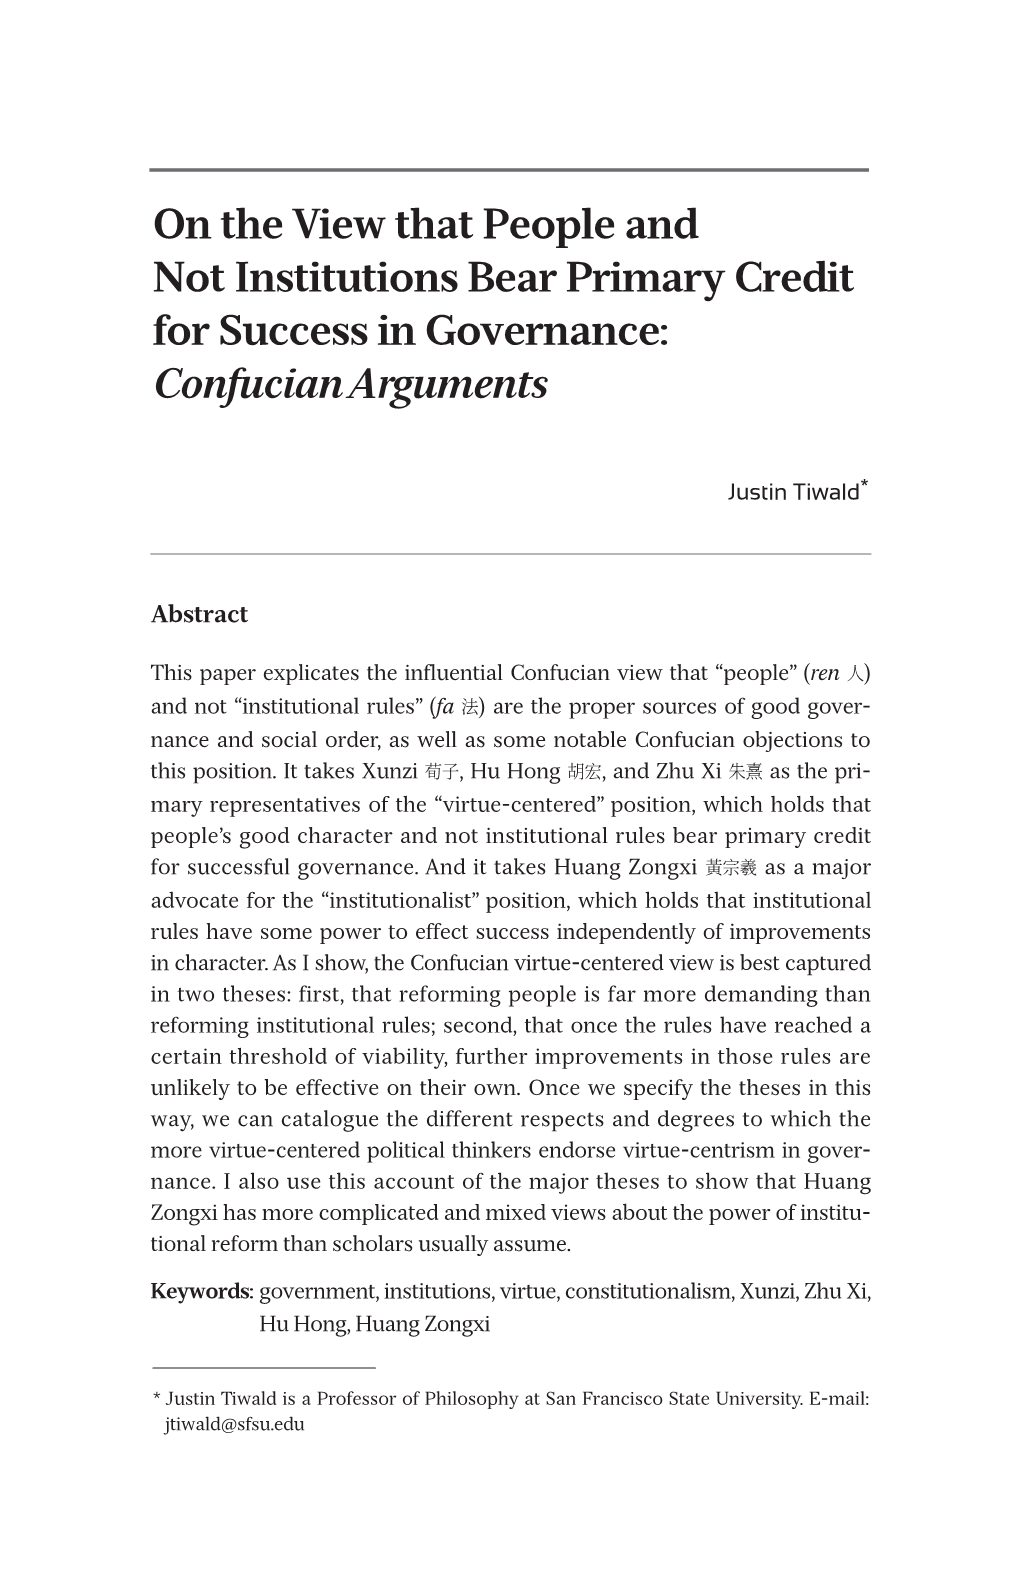 On the View That People and Not Institutions Bear Primary Credit for Success in Governance: Confucian Arguments